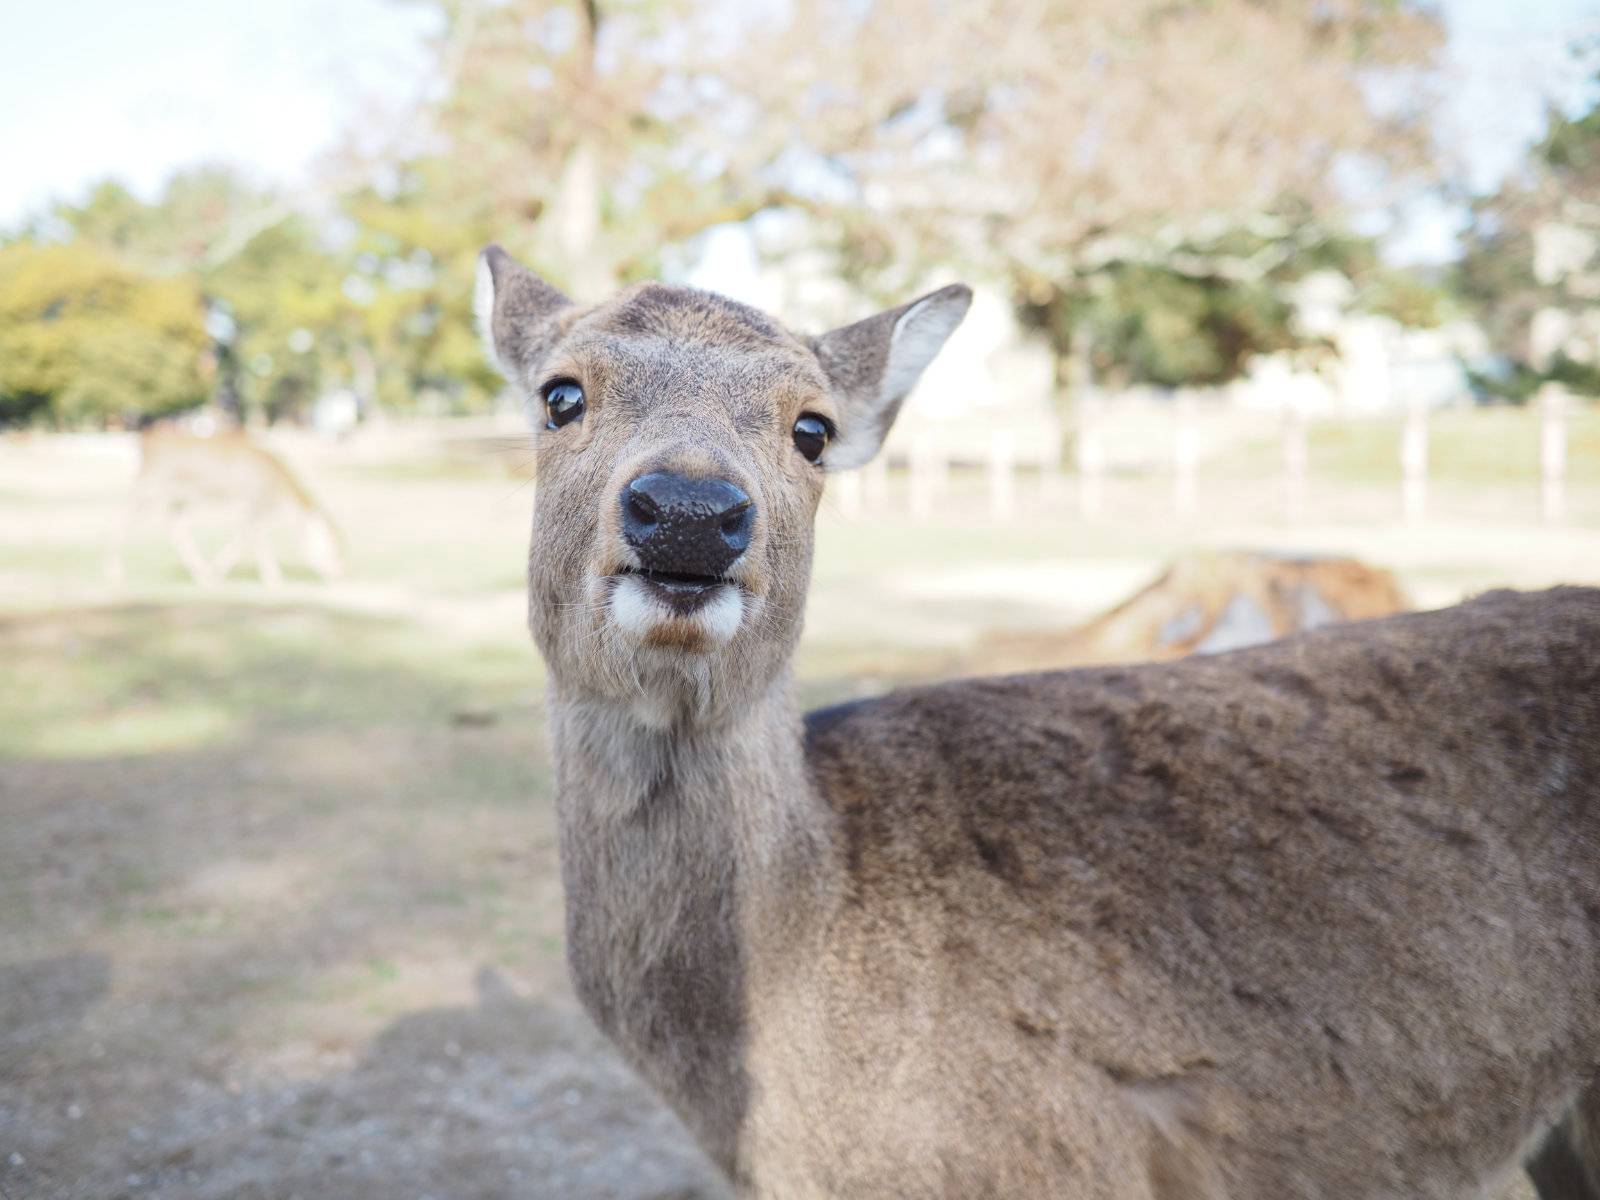 Deer looking face on to the camera